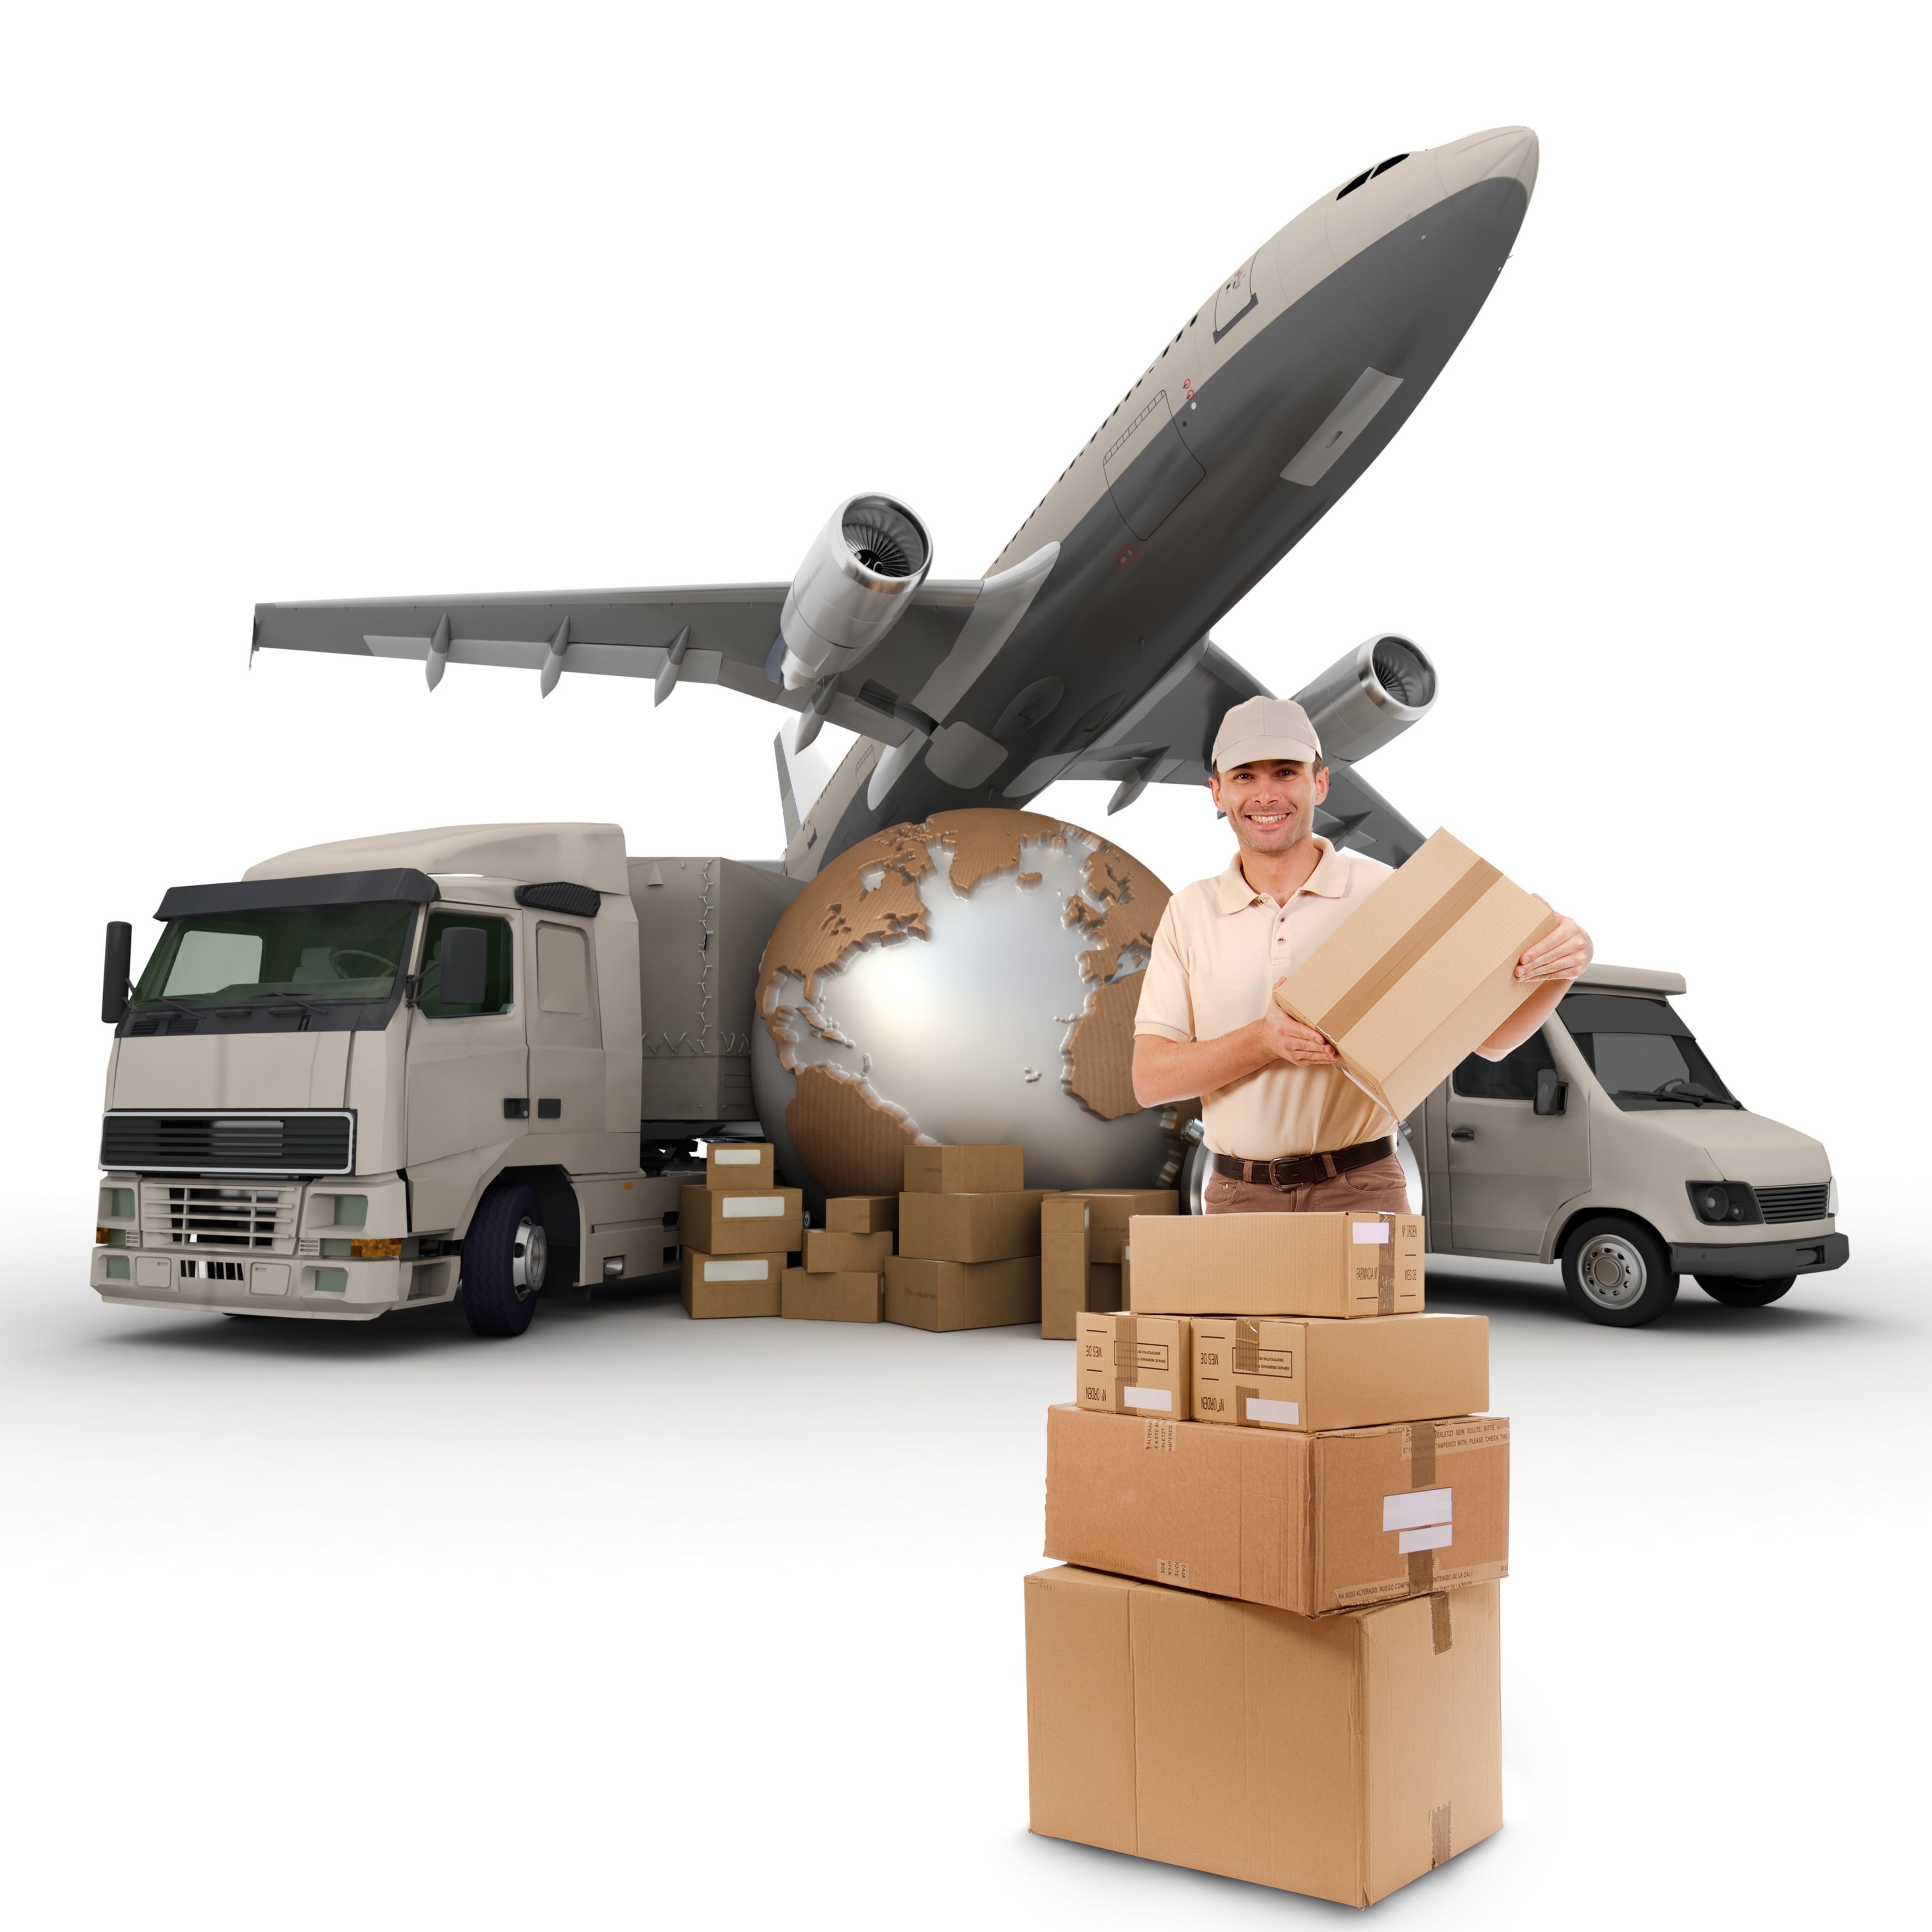 Overseas Courier Service: One Key to Global Success